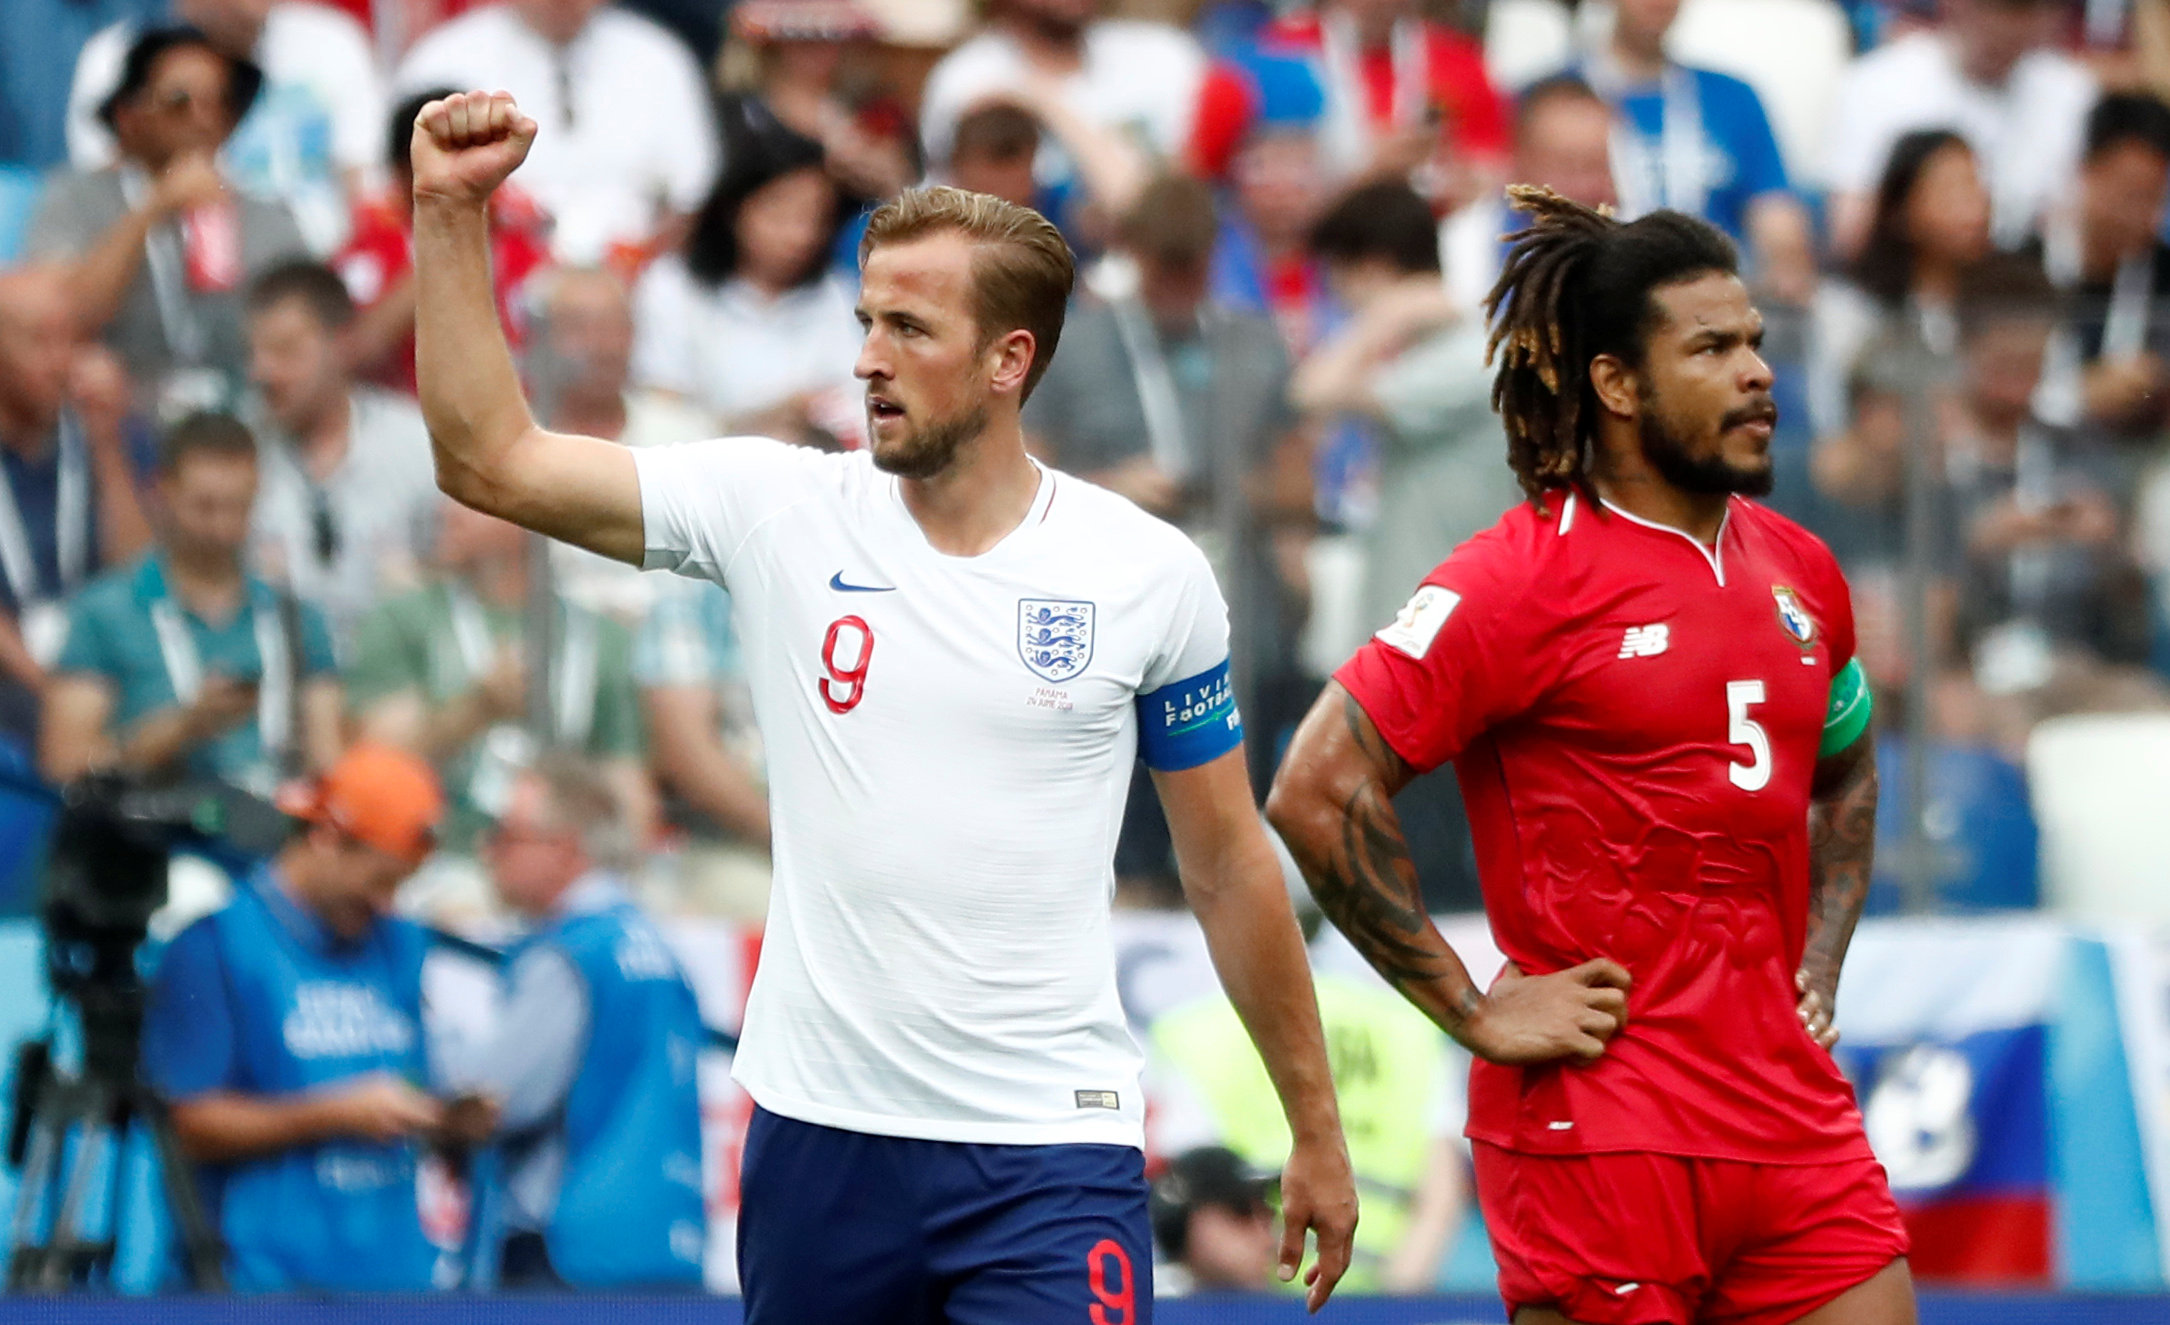 Football: England rout Panama with Kane hat-trick